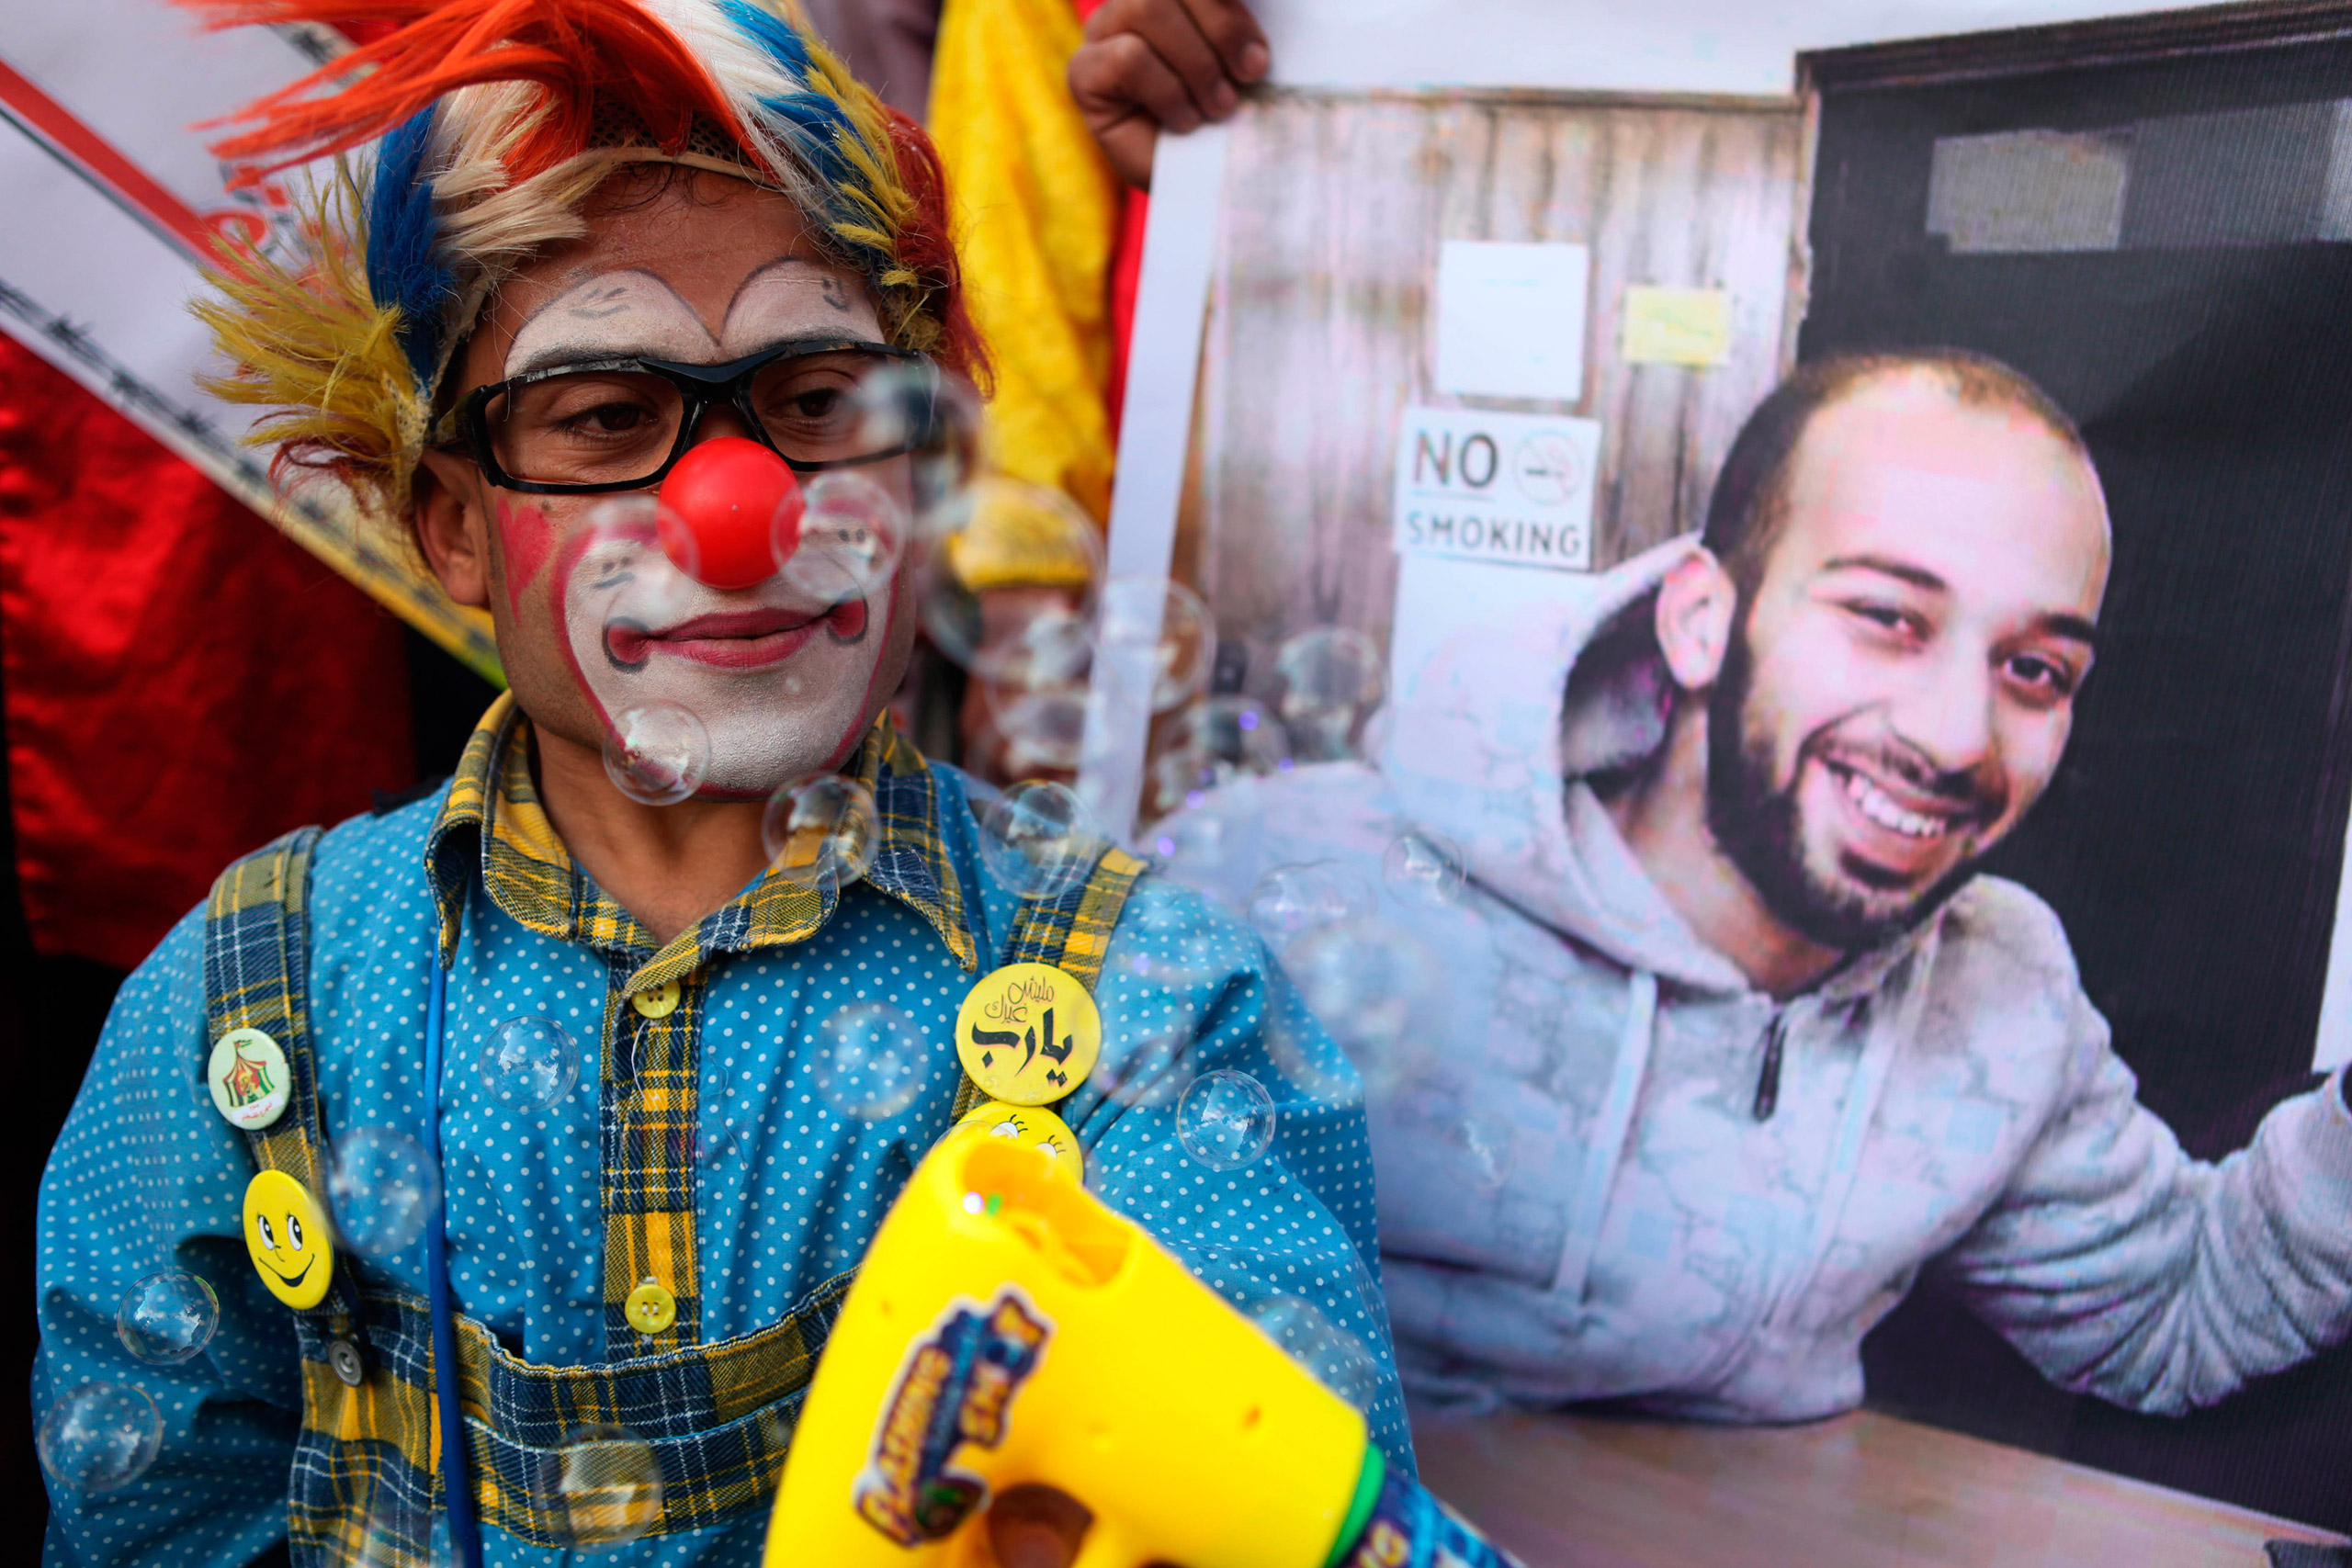 Palestinians clowns during a show of solidarity for their colleague, Mohammed Abu Sakha, who was jailed by Israel in December, in front of the Red Cross office in Gaza City, Feb. 8, 2016. (Majdi Fathi—NurPhoto/Sipa USA)